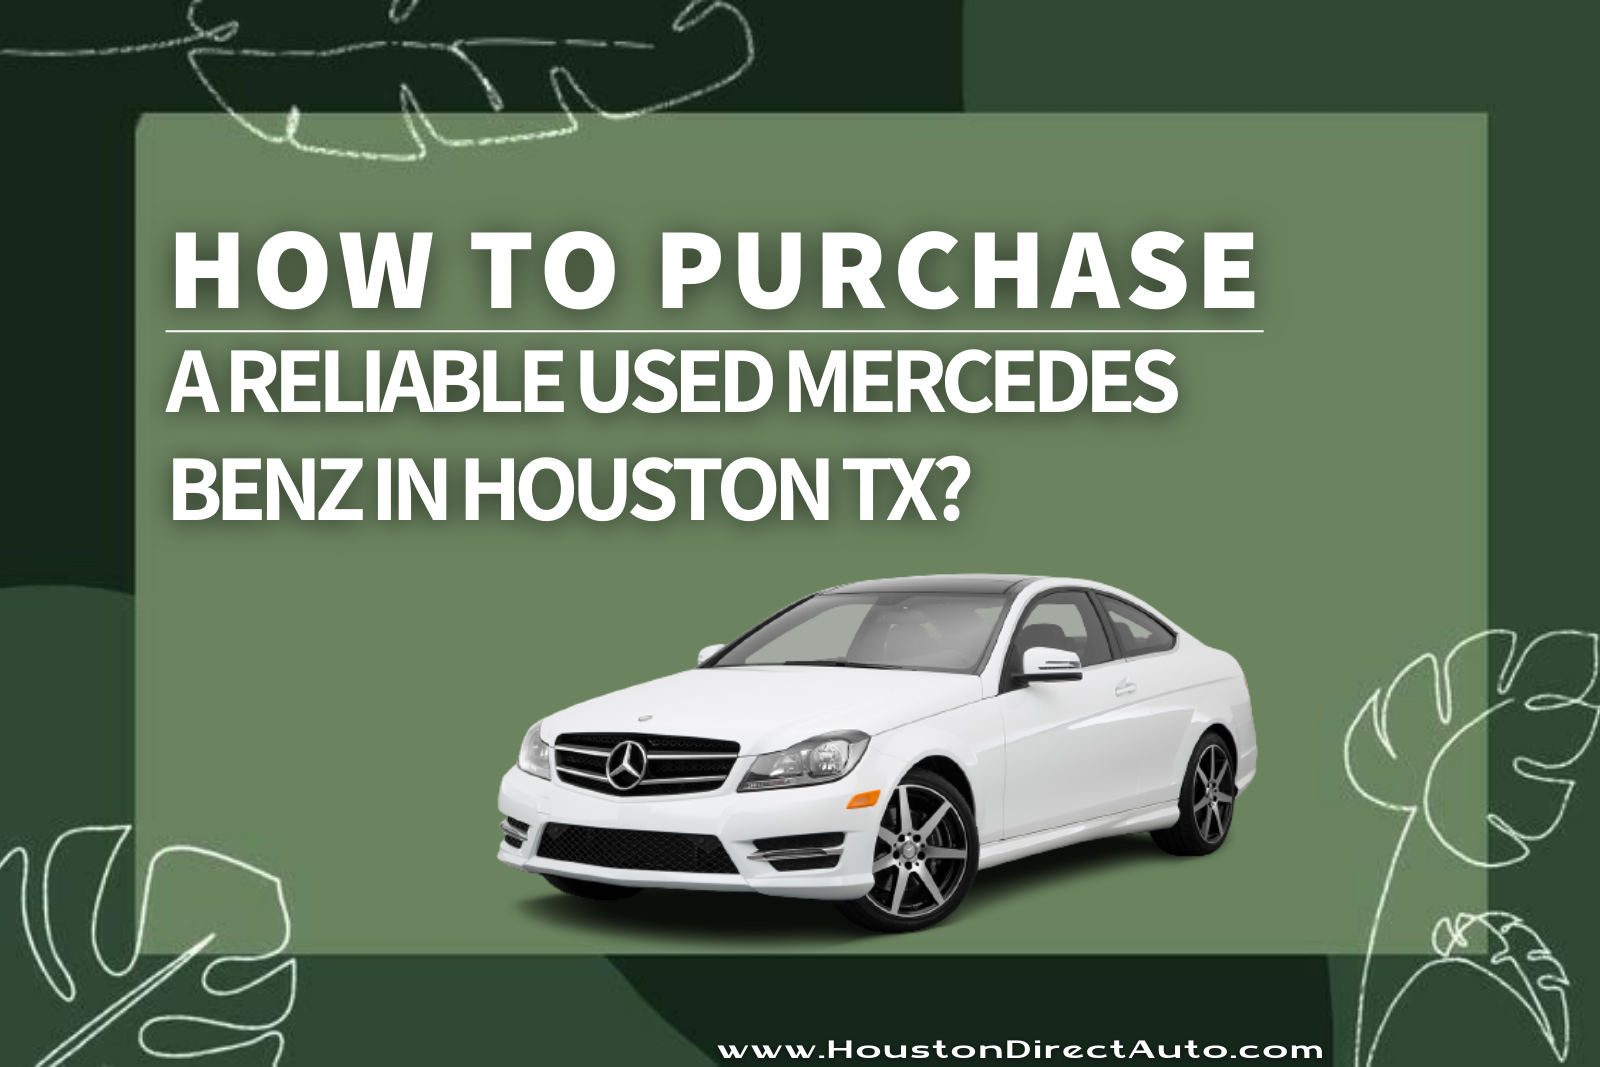 Used Mercedes For Sale In Houston TX, Mercedes Benz For Sale In Houston TX, Used Mercedes Benz In Houston TX, Used Mercedes In Houston TX